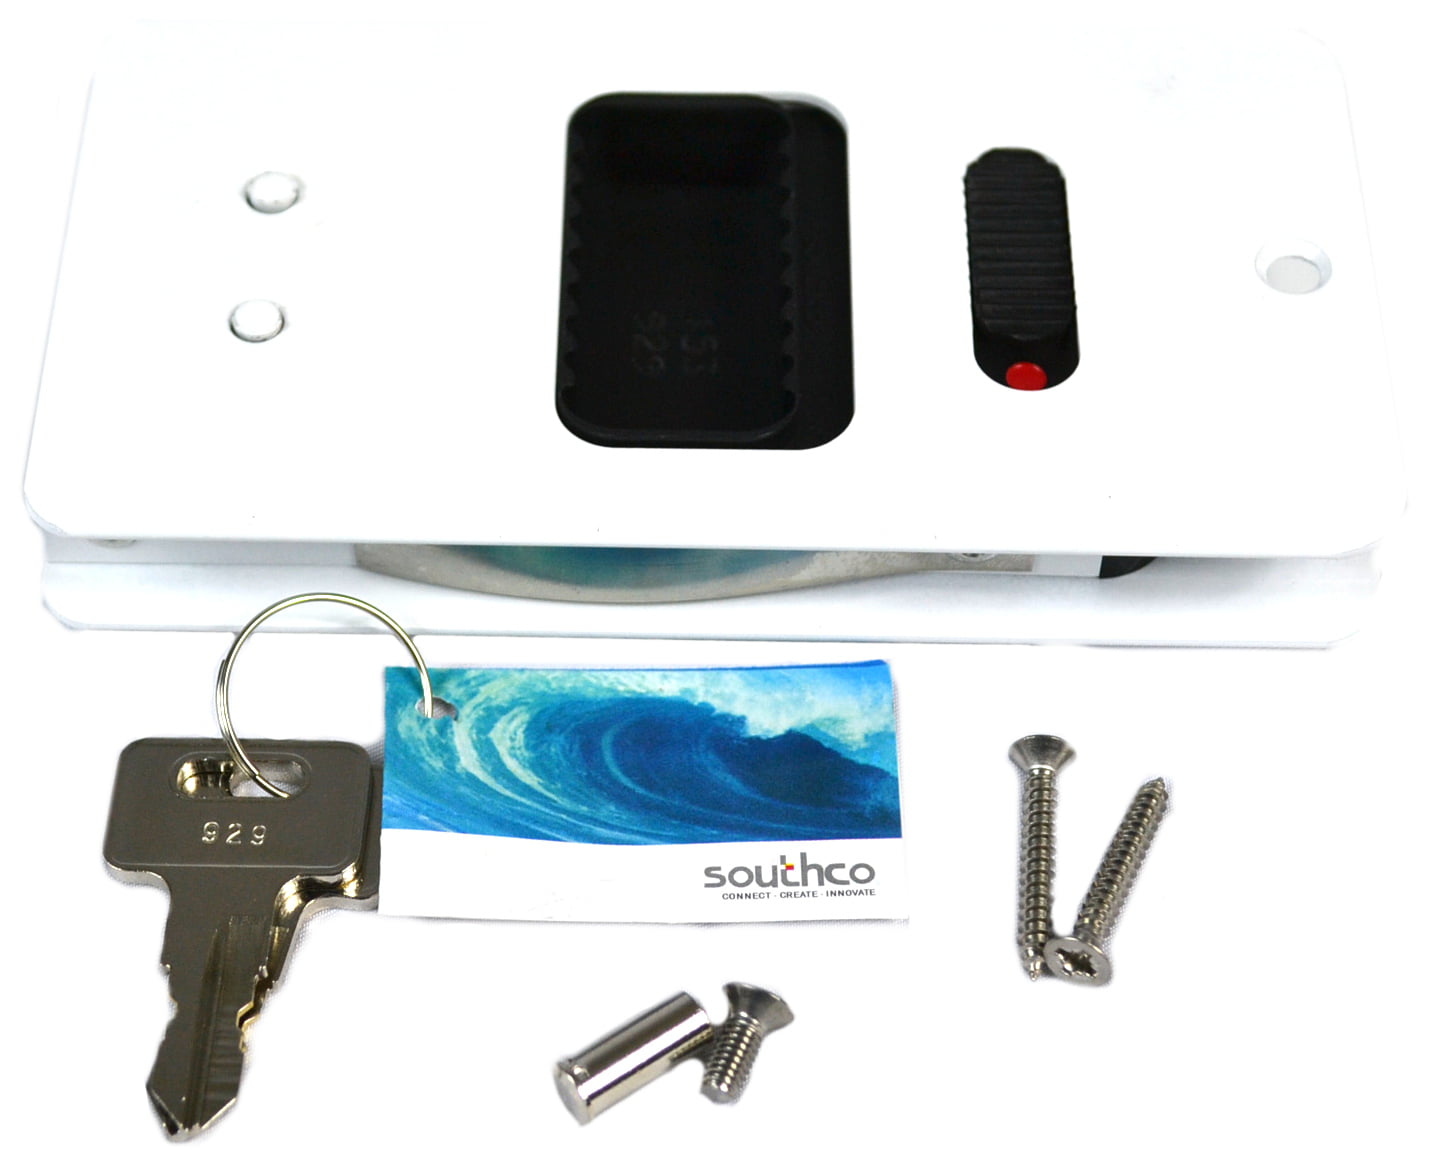 Southco MF-02-110-70 Flush Locking Entry Door Latch by Southco